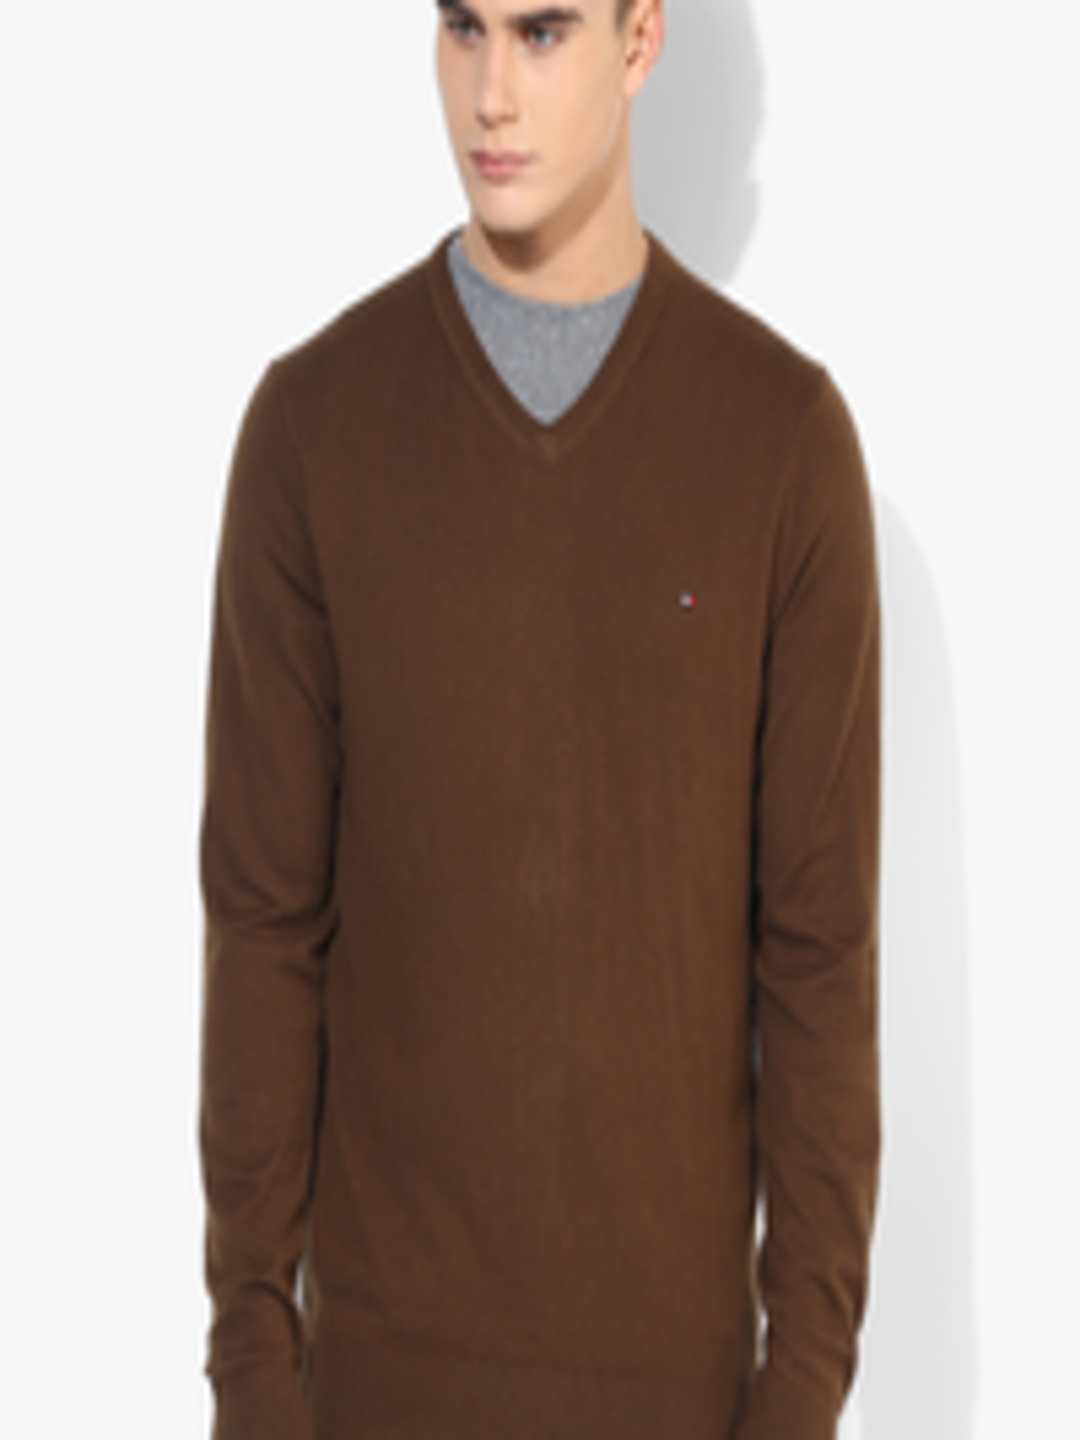 Buy Olive Solid V Neck Sweater - Sweaters for Men 8228131 | Myntra